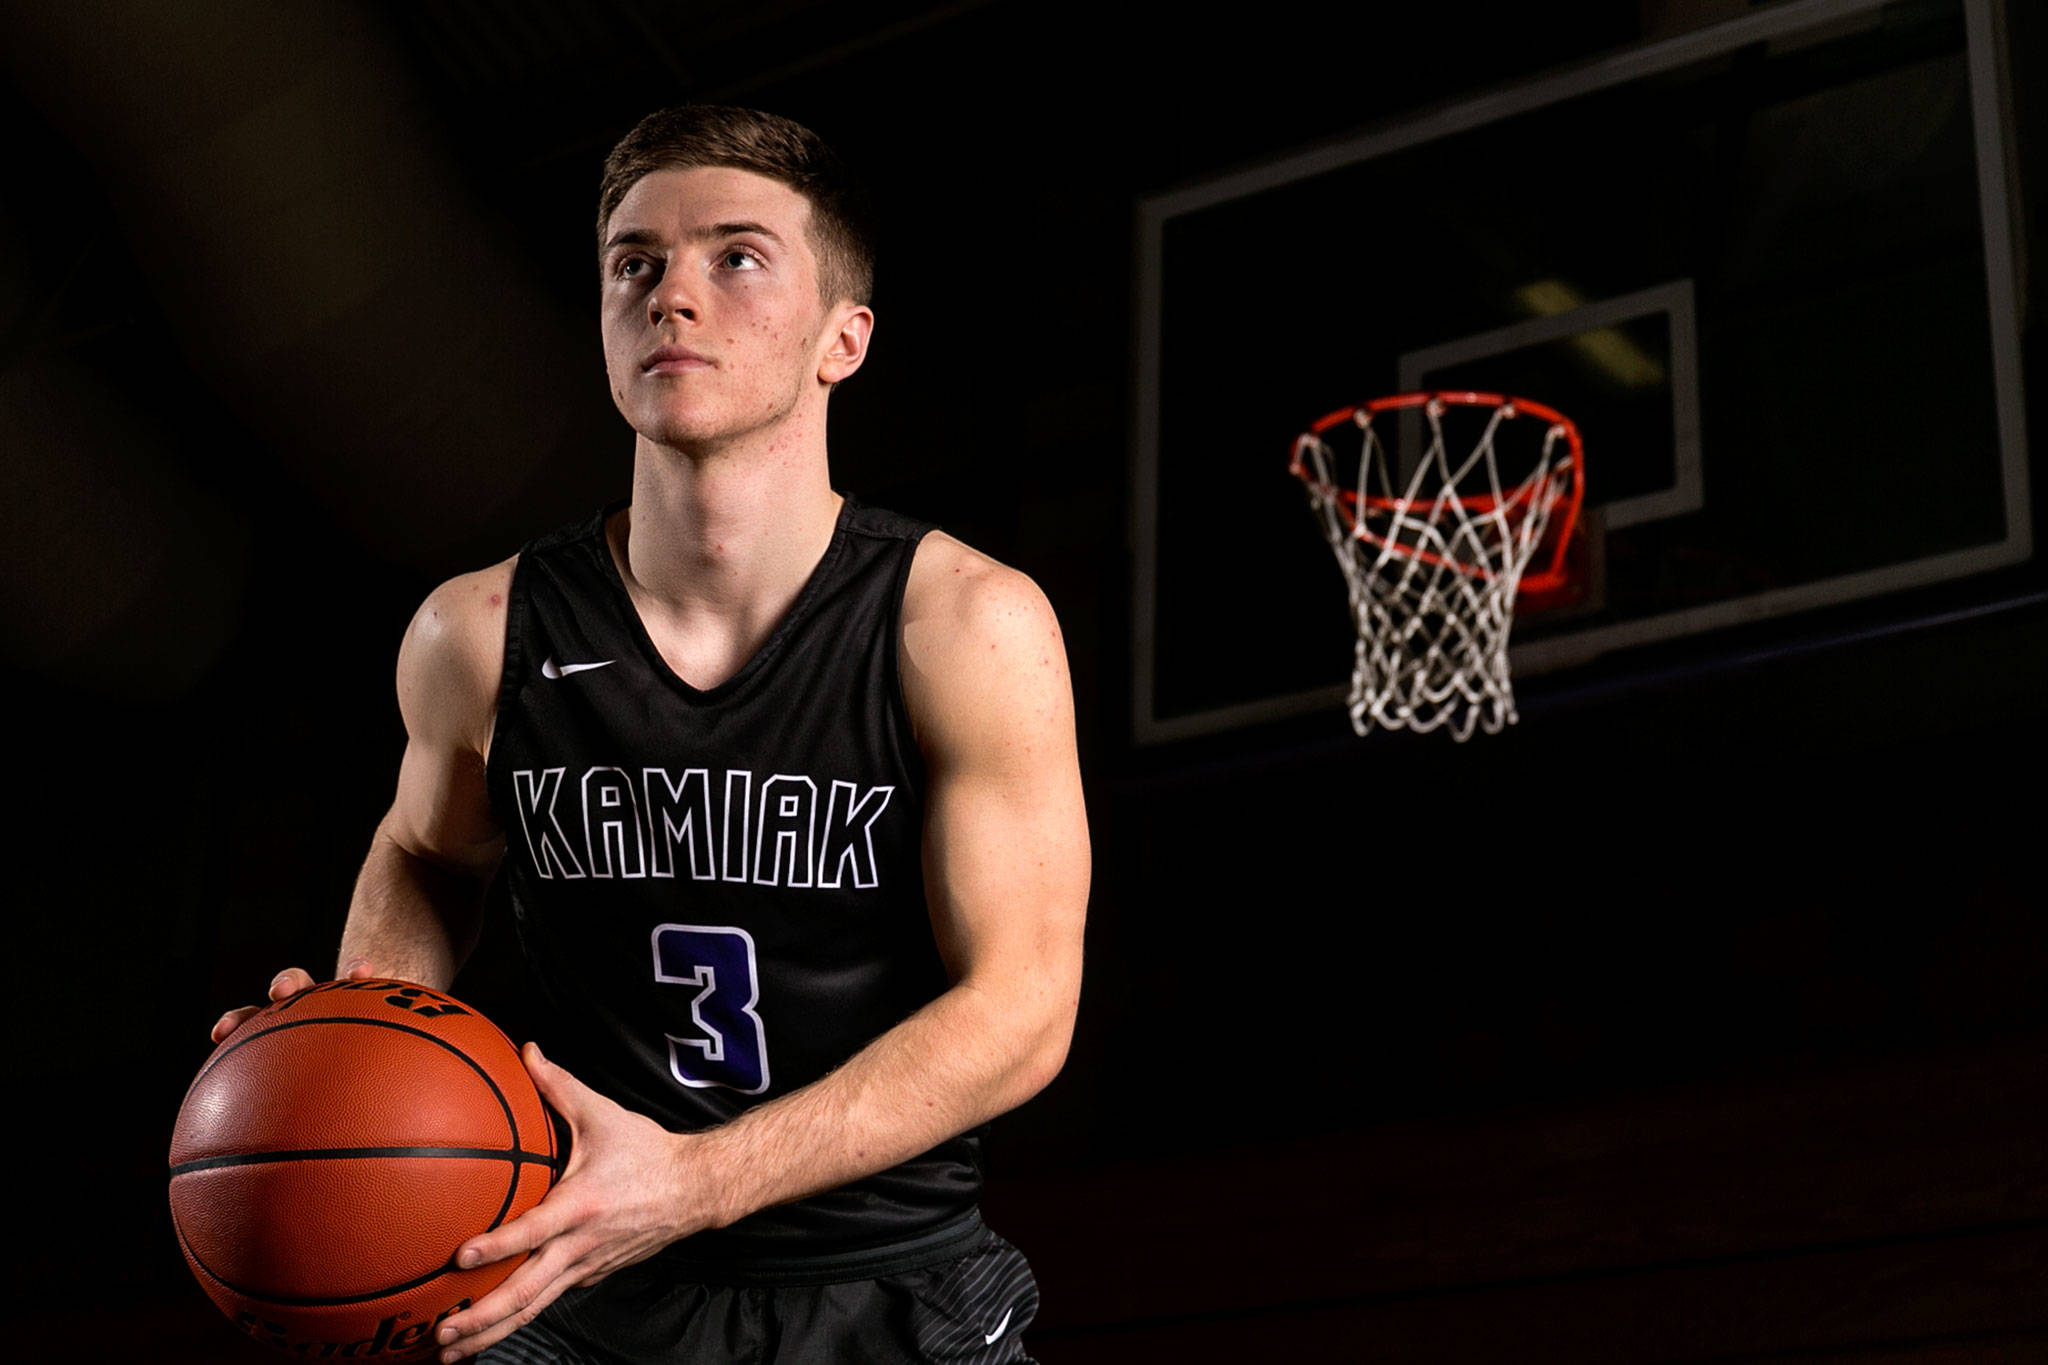 Kamiak senior Carson Tuttle is The Herald’s 2018 Boys Basketball Player of the Year. Tuttle averaged 22 points per game this season. (Kevin Clark / The Herald)